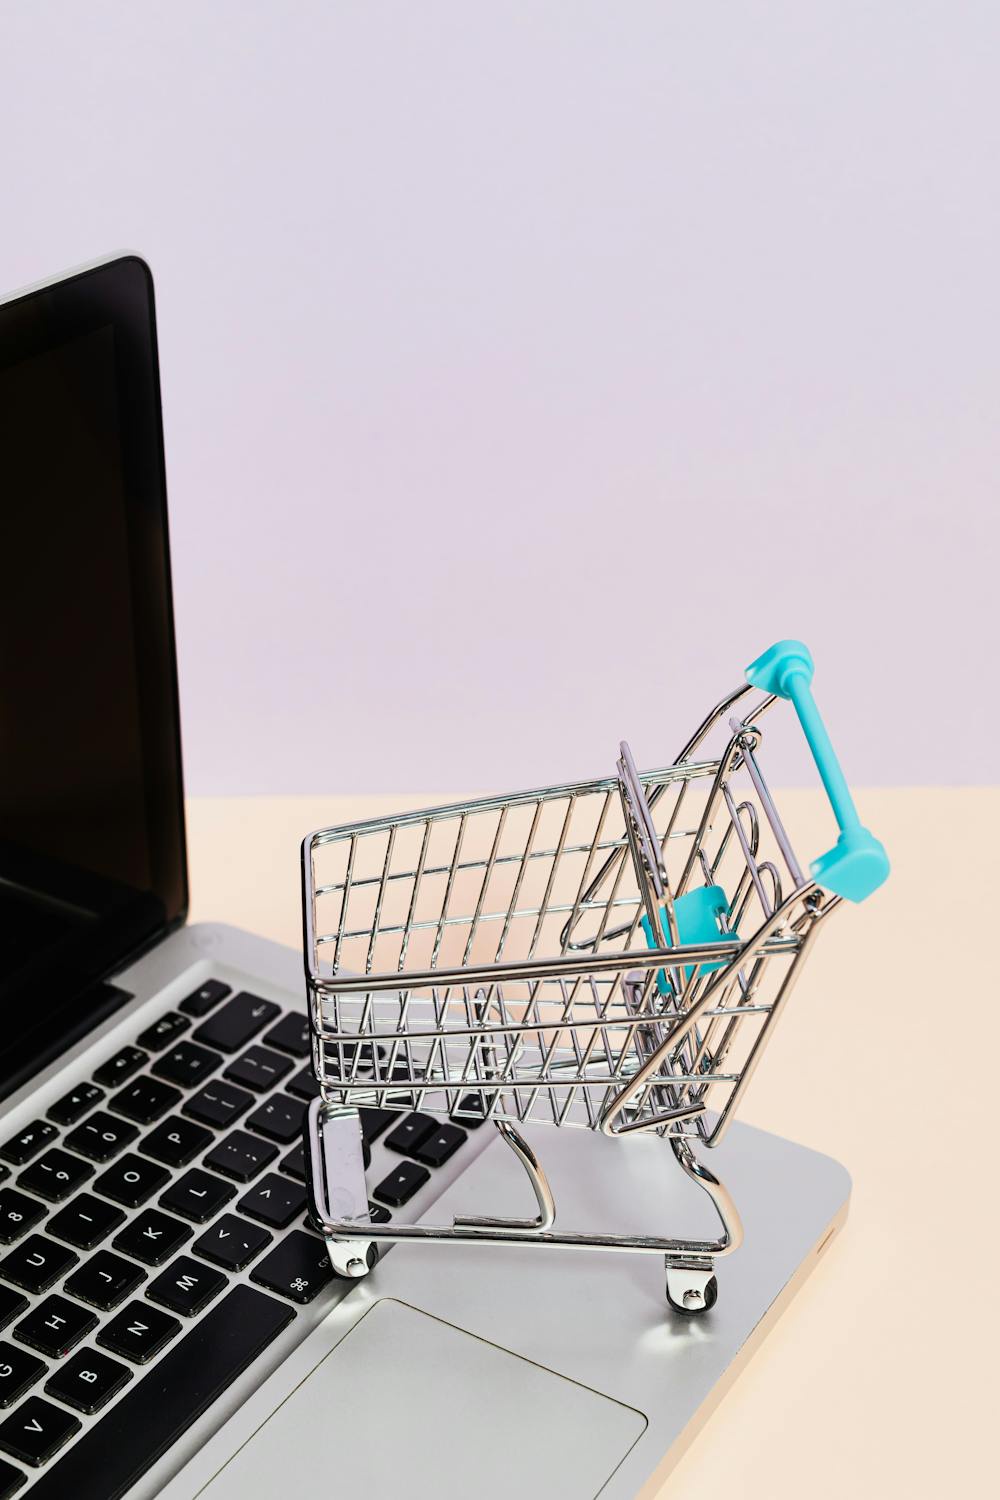 What are E-Commerce Fulfillment Services and their benefits in modern E-Commerce business?